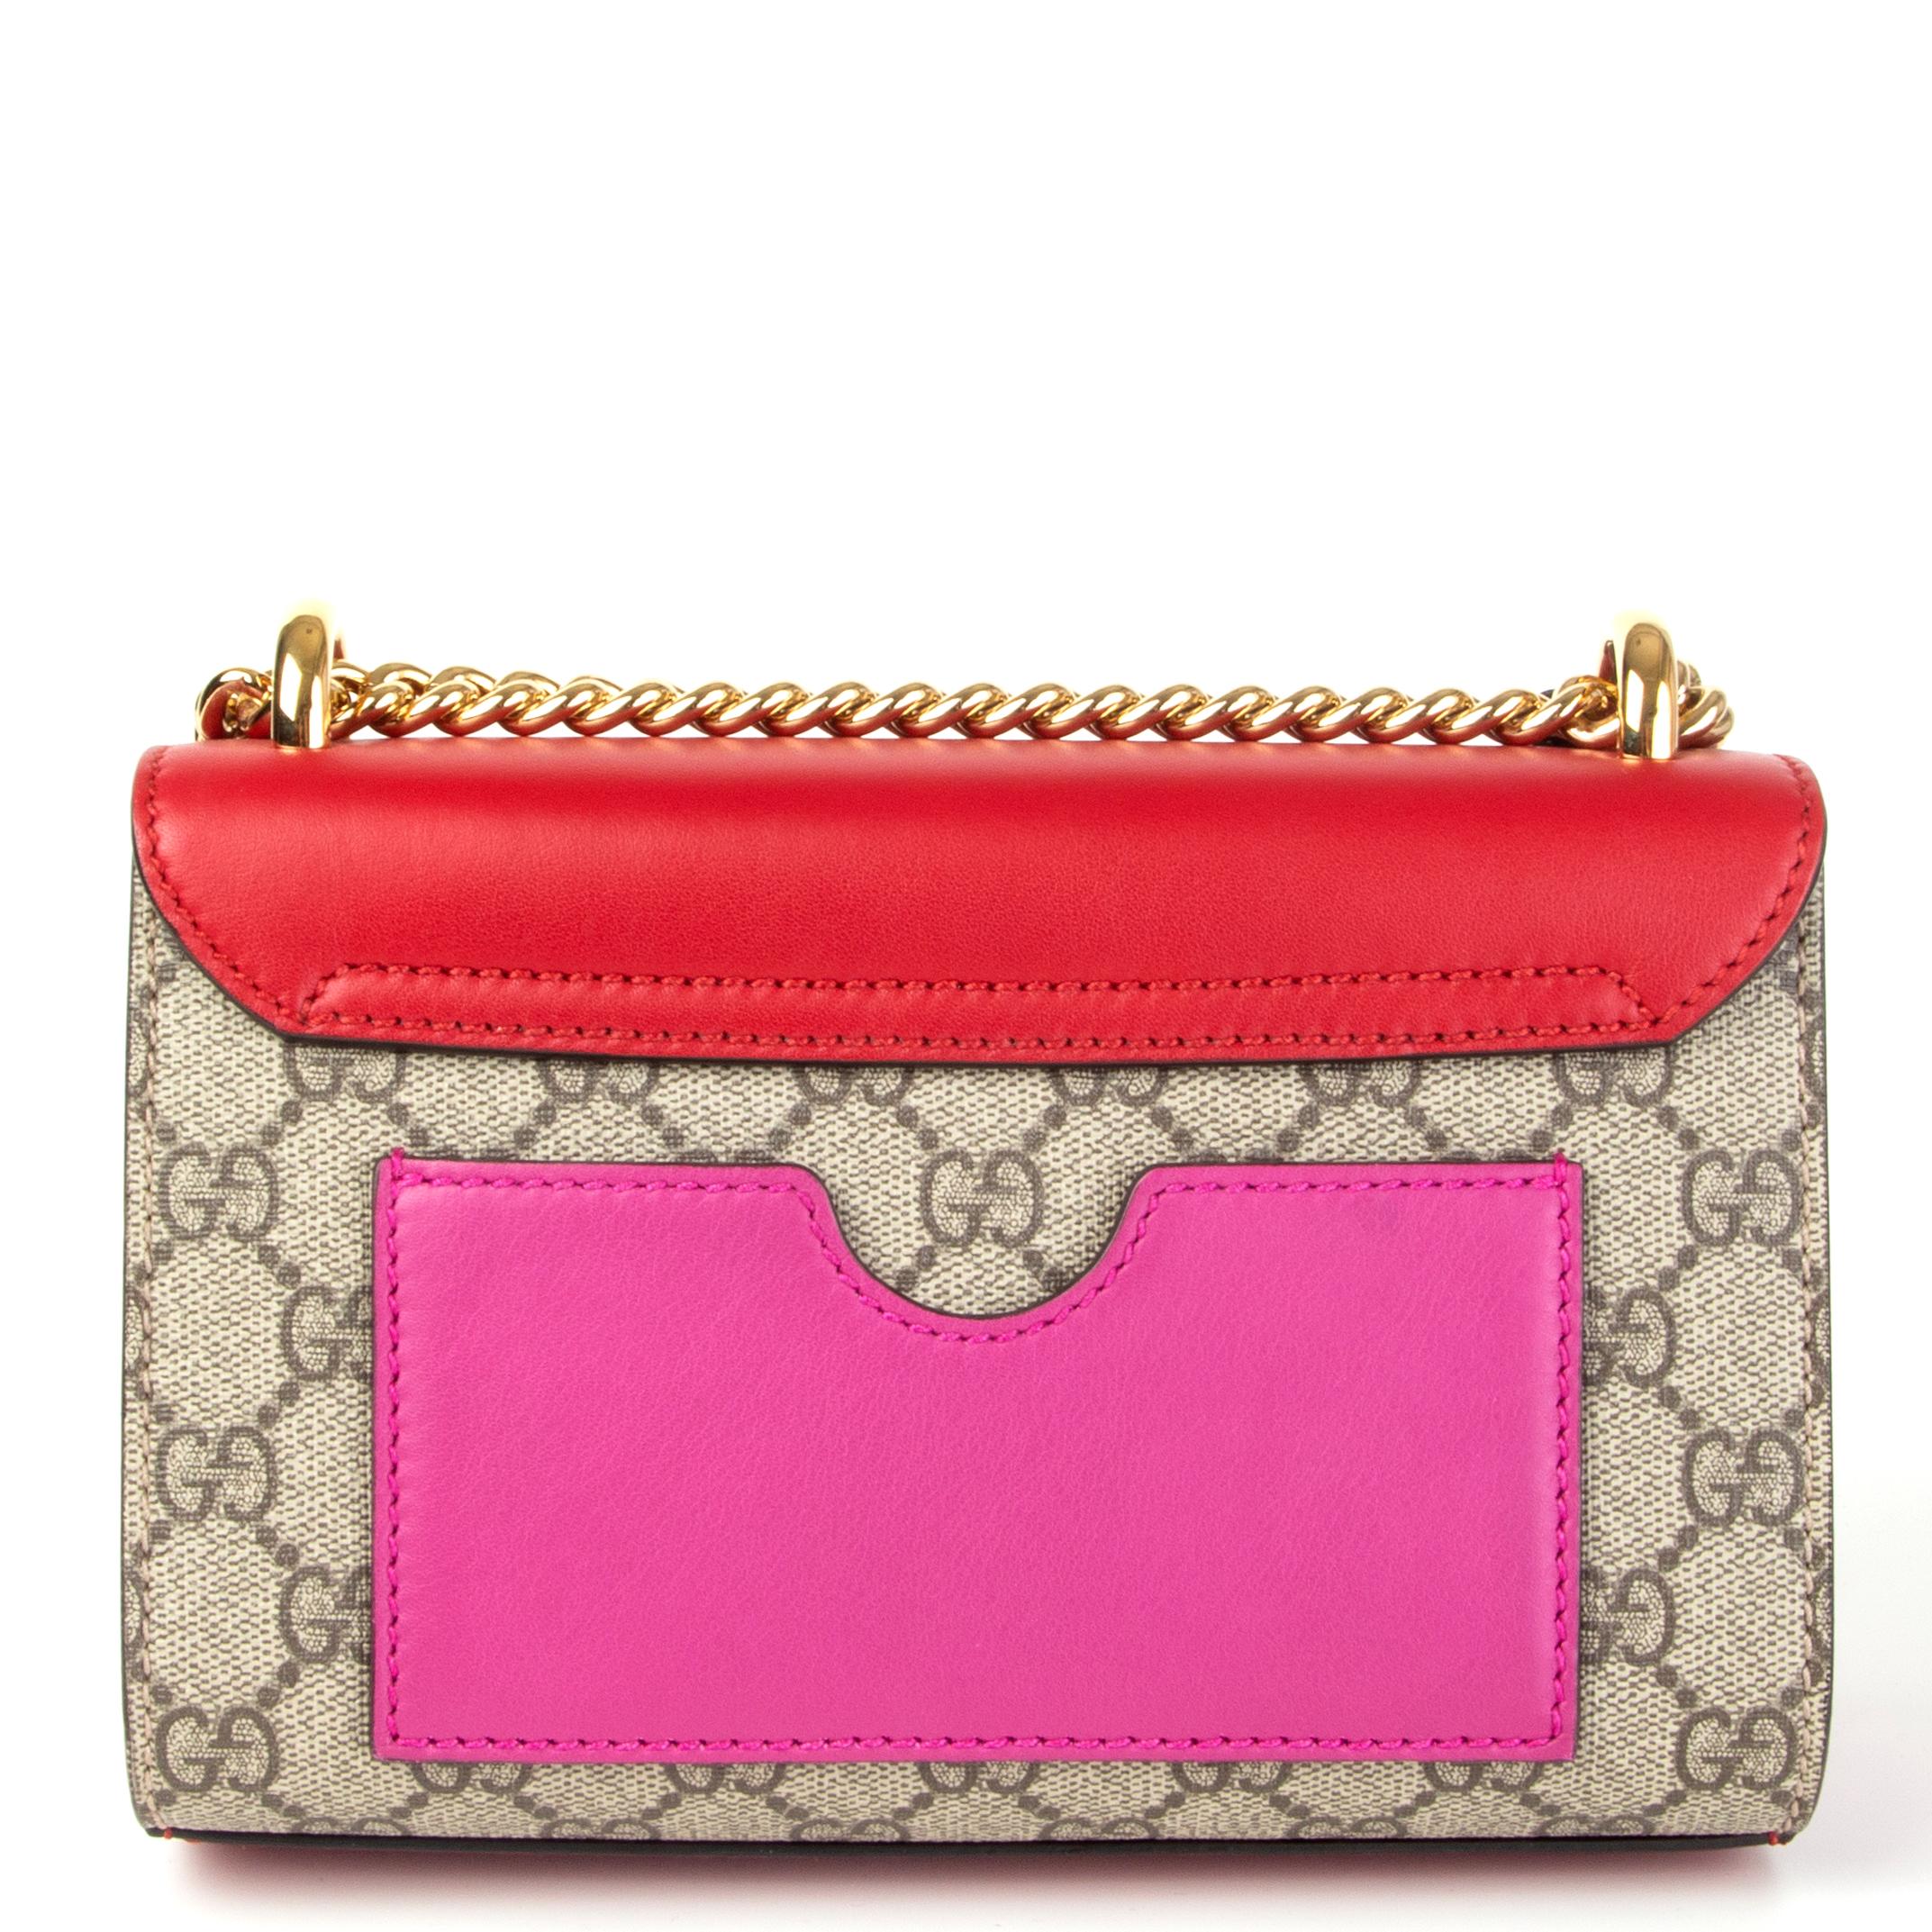 pink gucci purse with gold chain